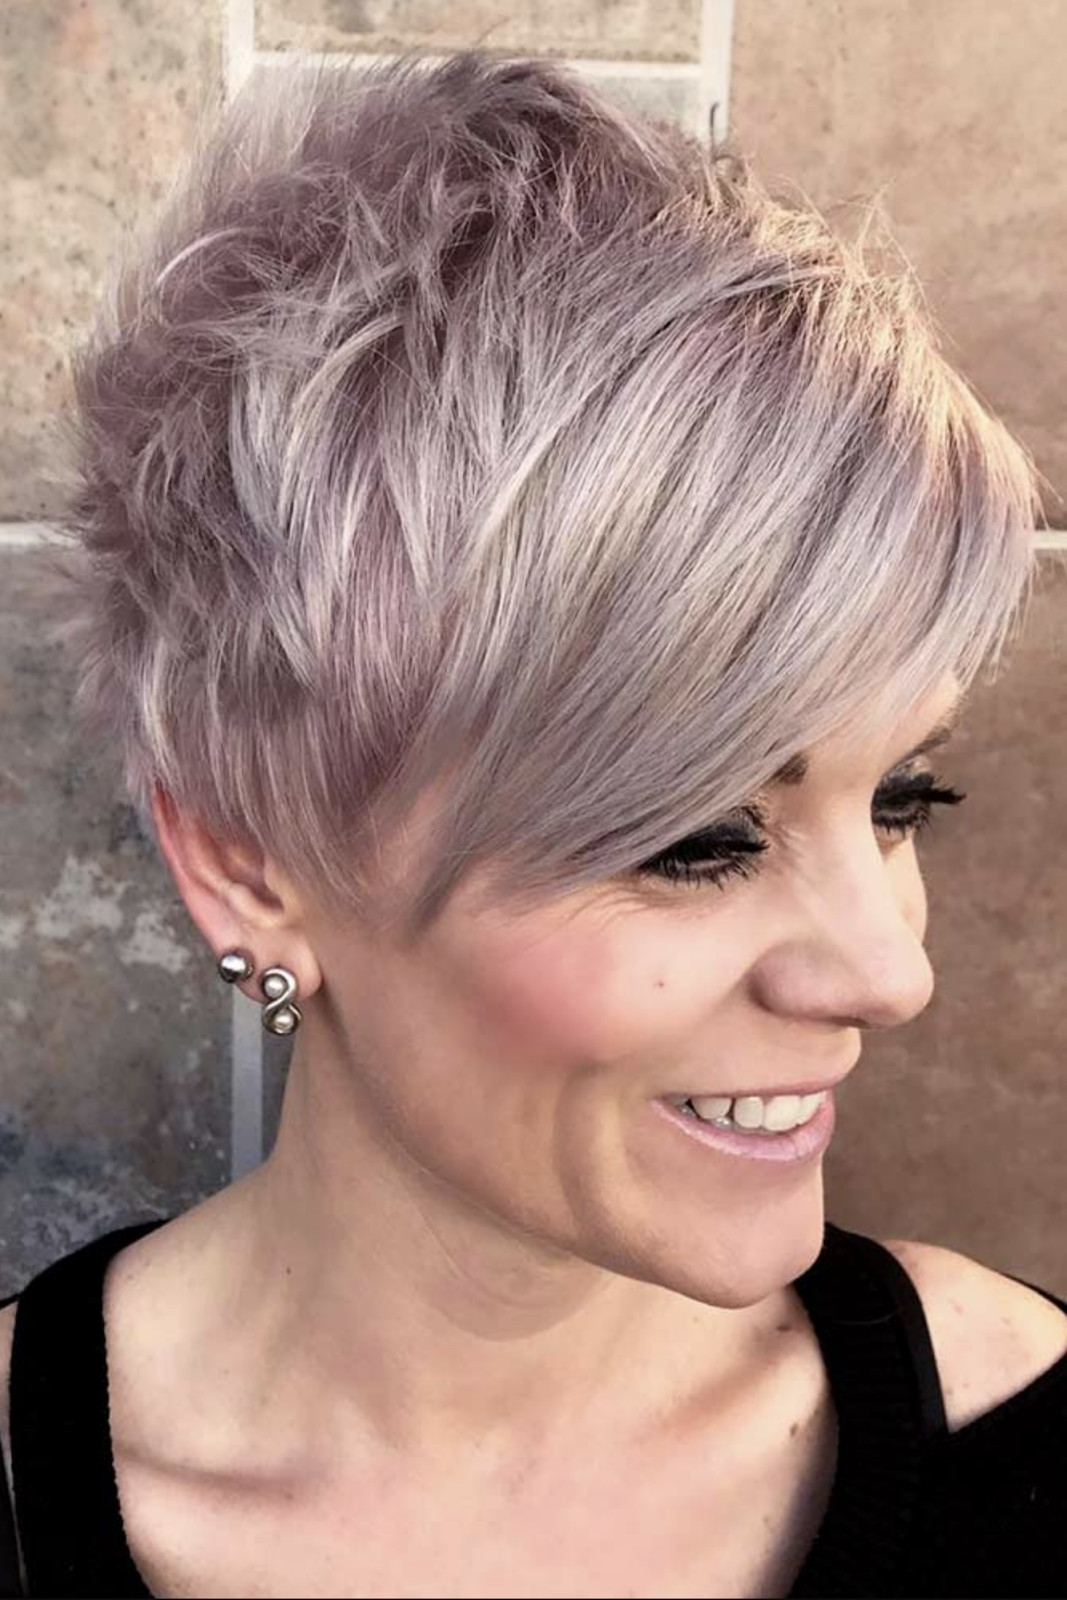 Short Sassy Haircuts 2020
 2019 2020 Short Hairstyles for Women Over 50 That Are